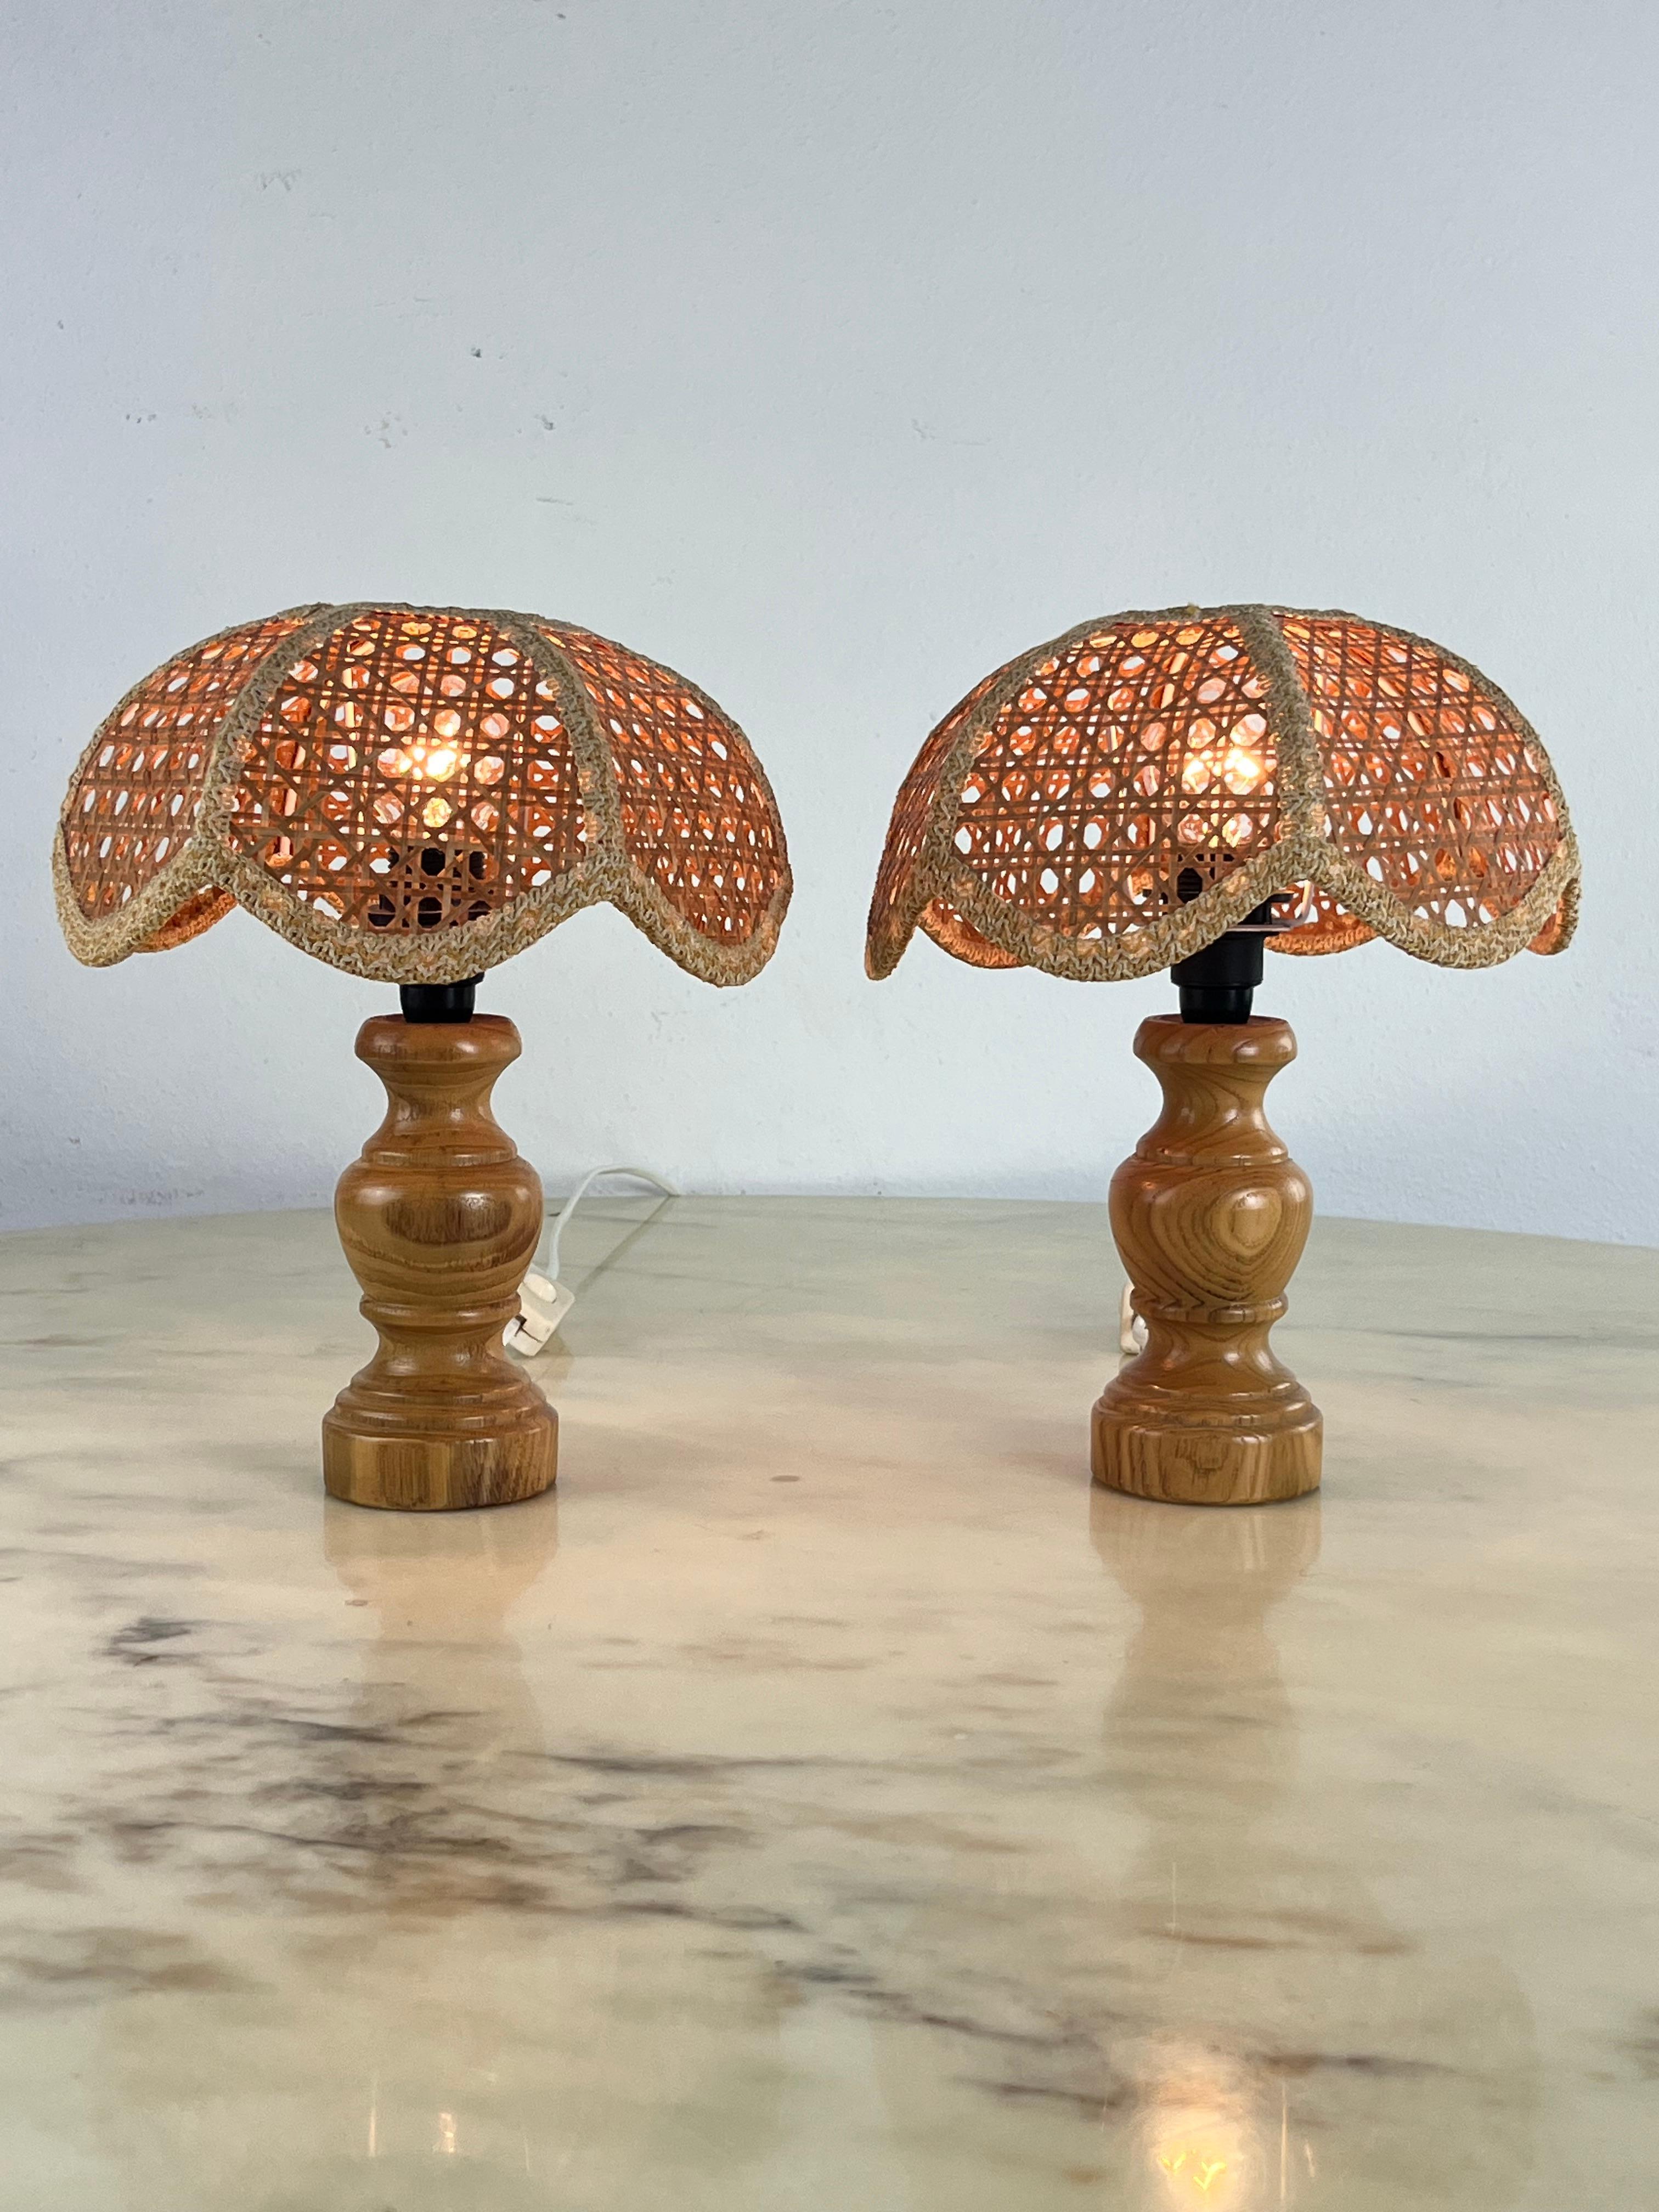 Set of 2 mid-century rattan bedside lamps, Italian design 1960s
Intact and working, good condition.
E14 lamps.